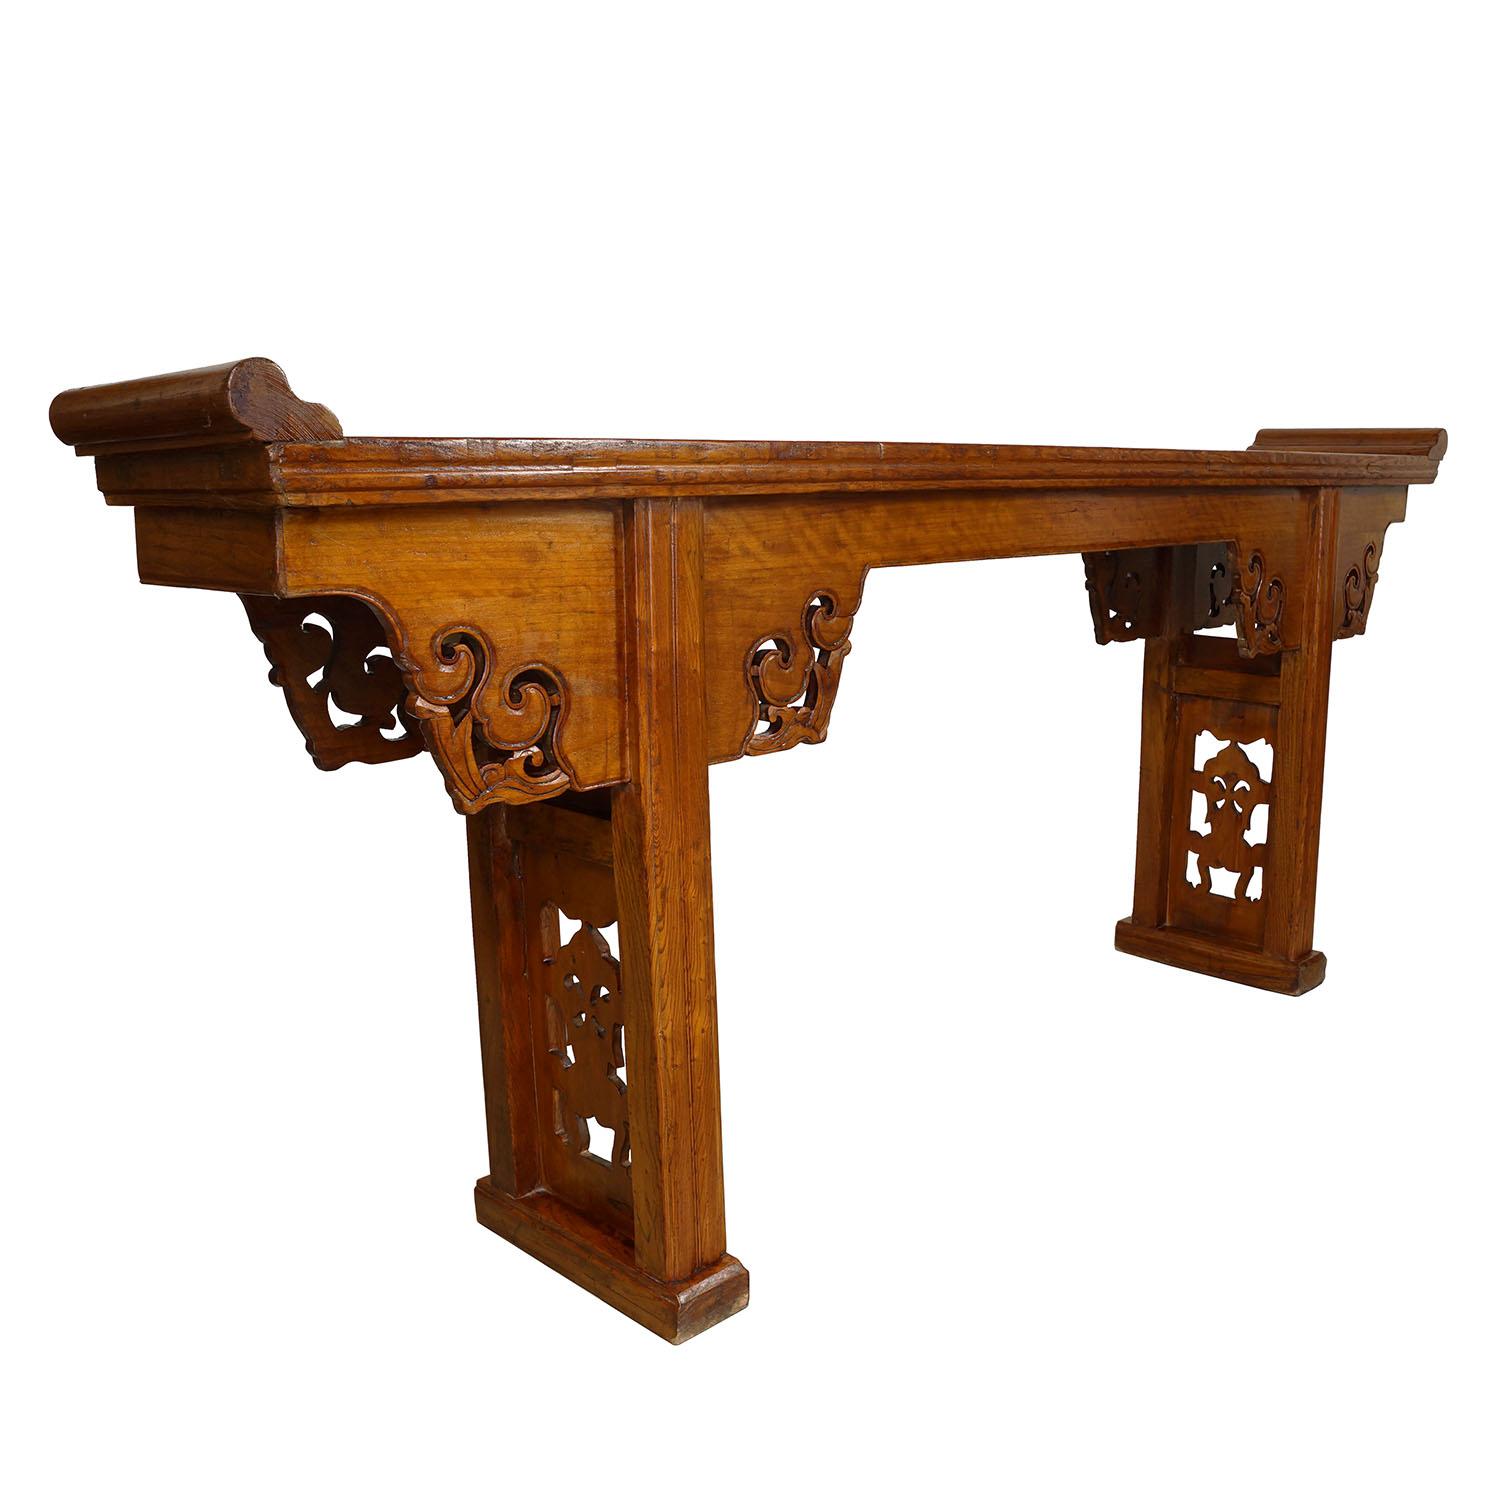 Size: 35in H x 87in W x 13.5in D
Origin: China
Circa: 1800 - 1900
Material: Elm Wood
Condition: Original finish, solid wood construction, hand carved, very heavy, sturdy, normal age wear.

Look at this Antique Open Carved Altar table from China. It